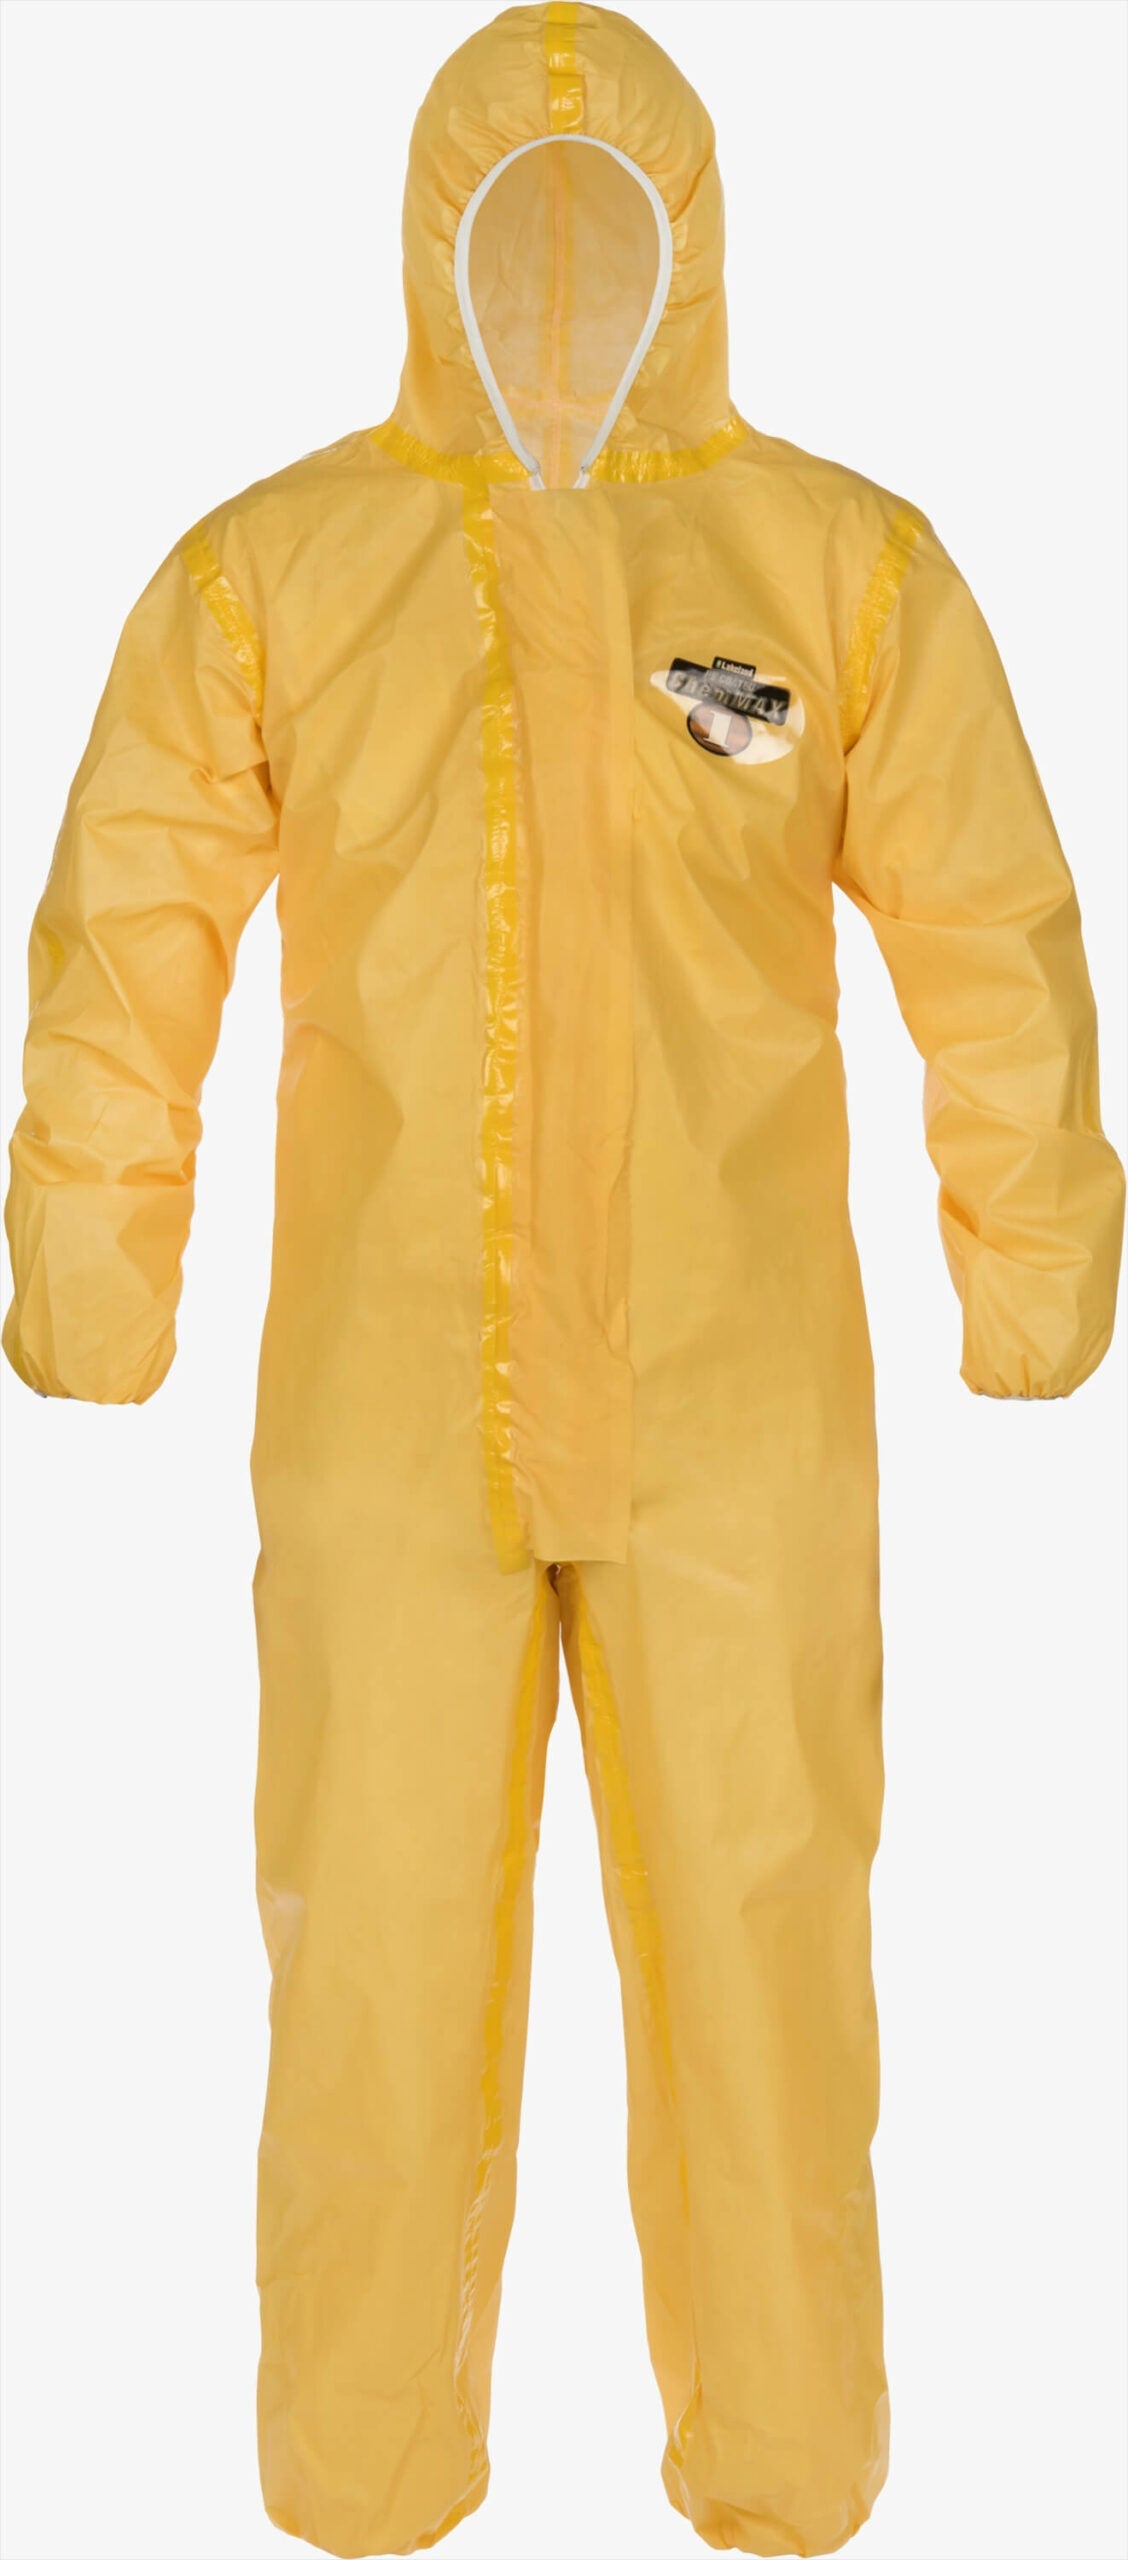 Lakeland C1T130Y Case of 6 ChemMax 1 Sealed Seam Coverall | Free Shipping and No Sales Tax